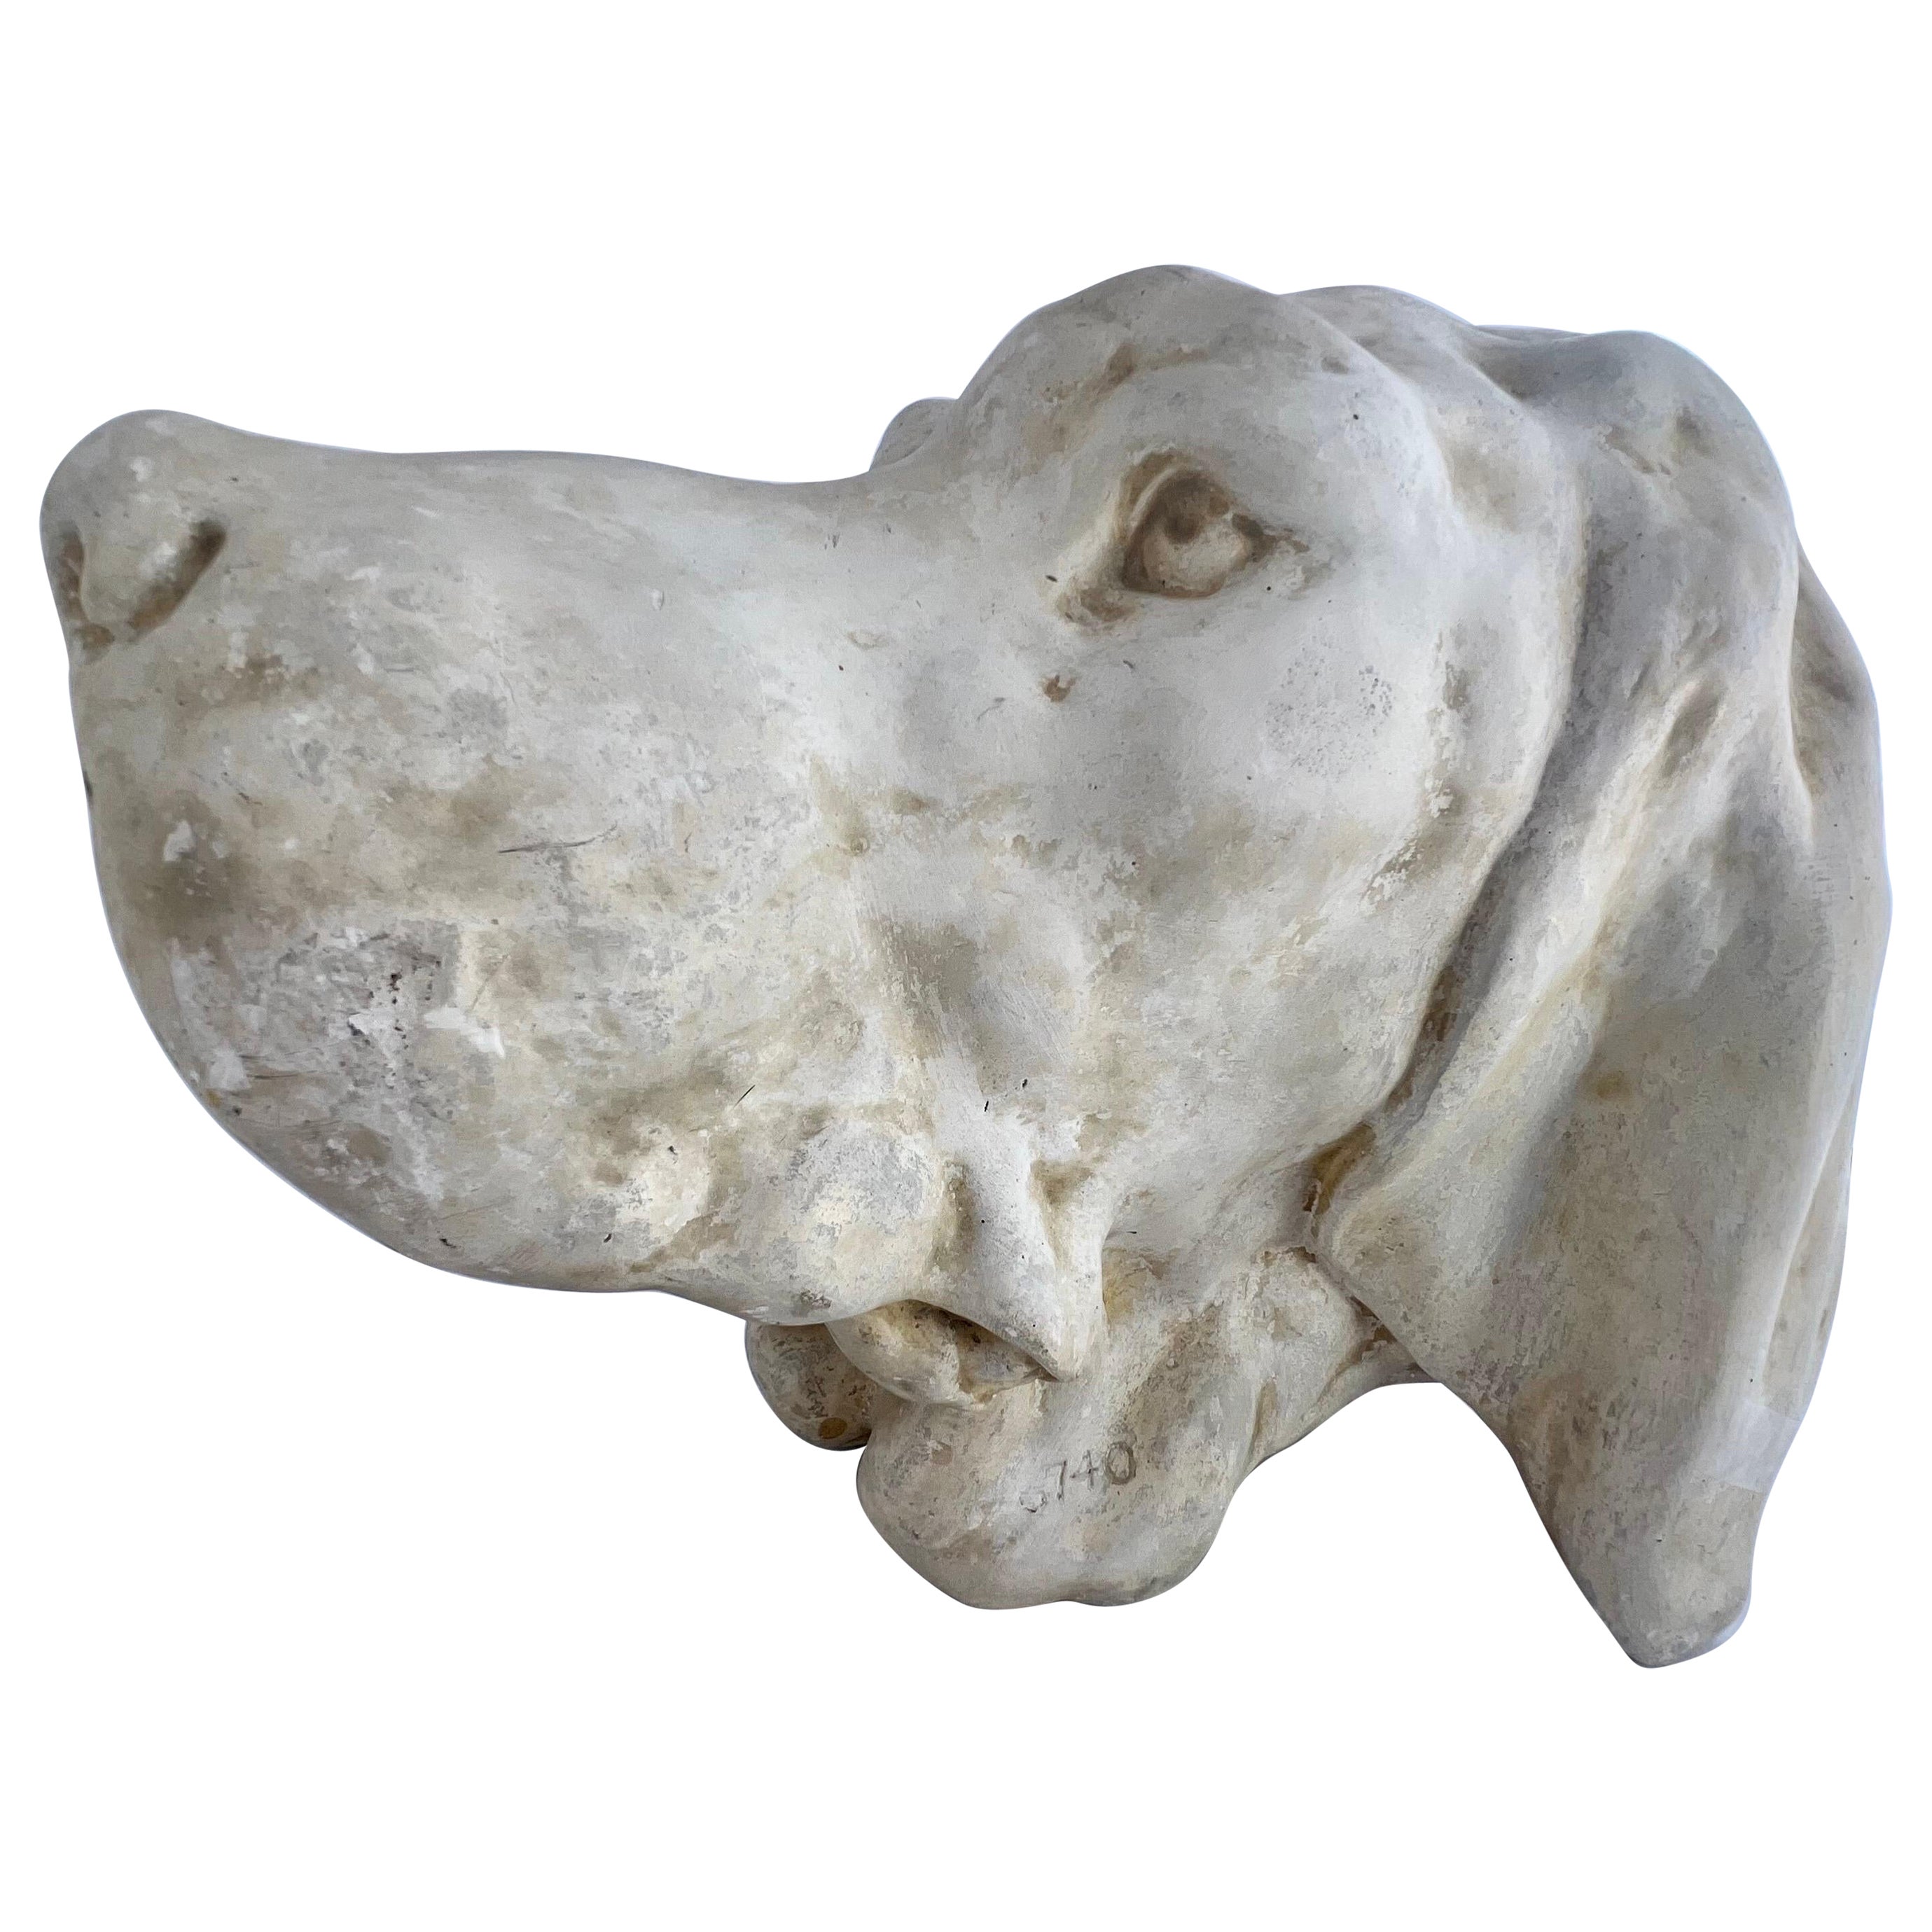 Oringinal Casting of a Pointer, Early 1900s by P.P. Caproni Bros of Boston